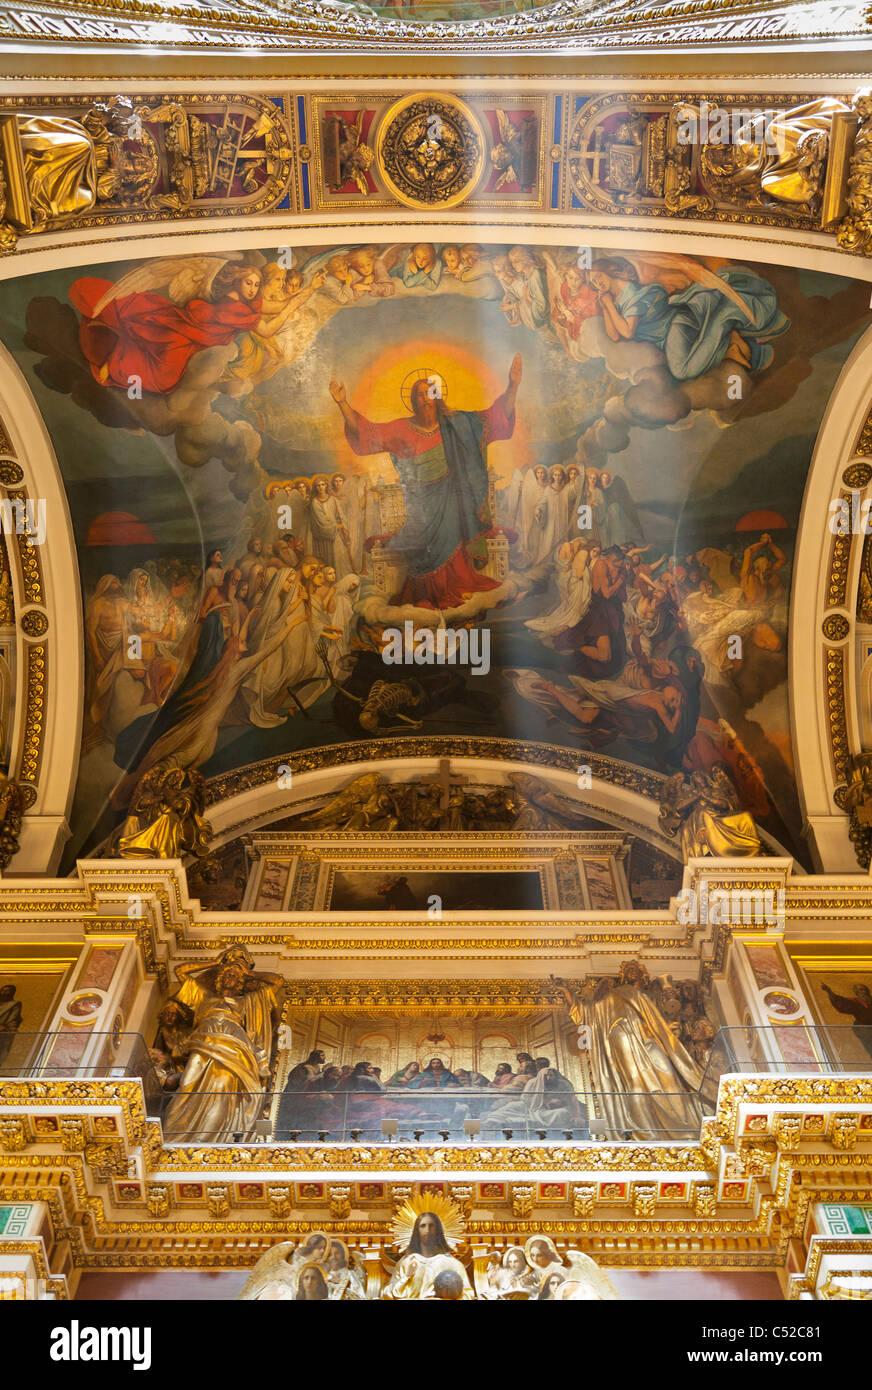 Saint Isaac's Cathedral, St. Petersburg Russia – interior 6 Stock Photo